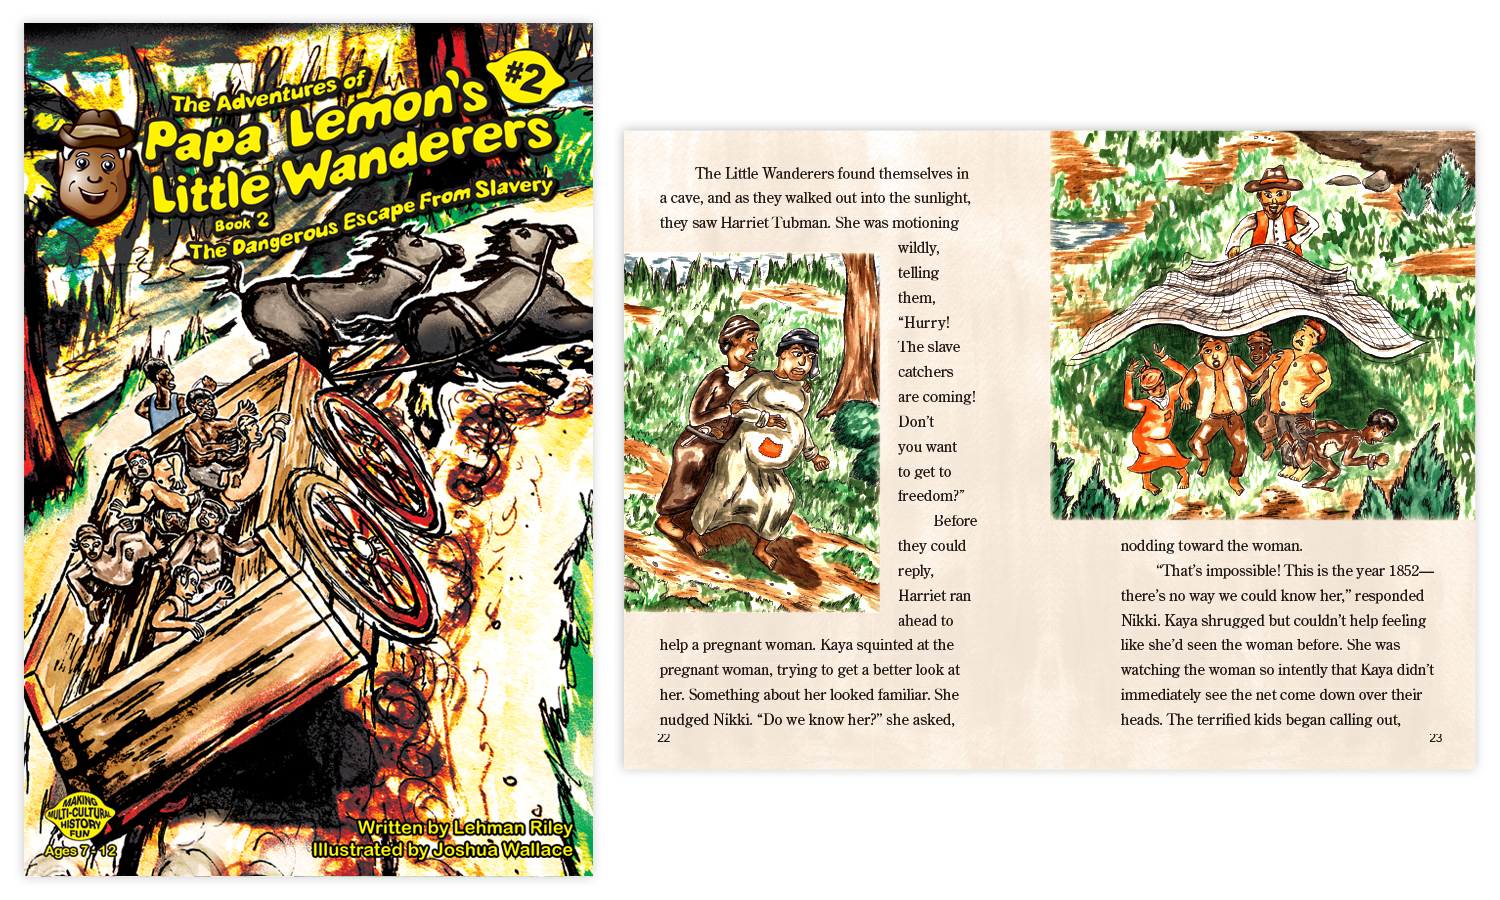 Twin Cities Childrens Book Illustrator Josh Wallace "The Adventures of Papa Lemon's Little Wanderers, Book 2: The Dangerous Escape from Slavery"